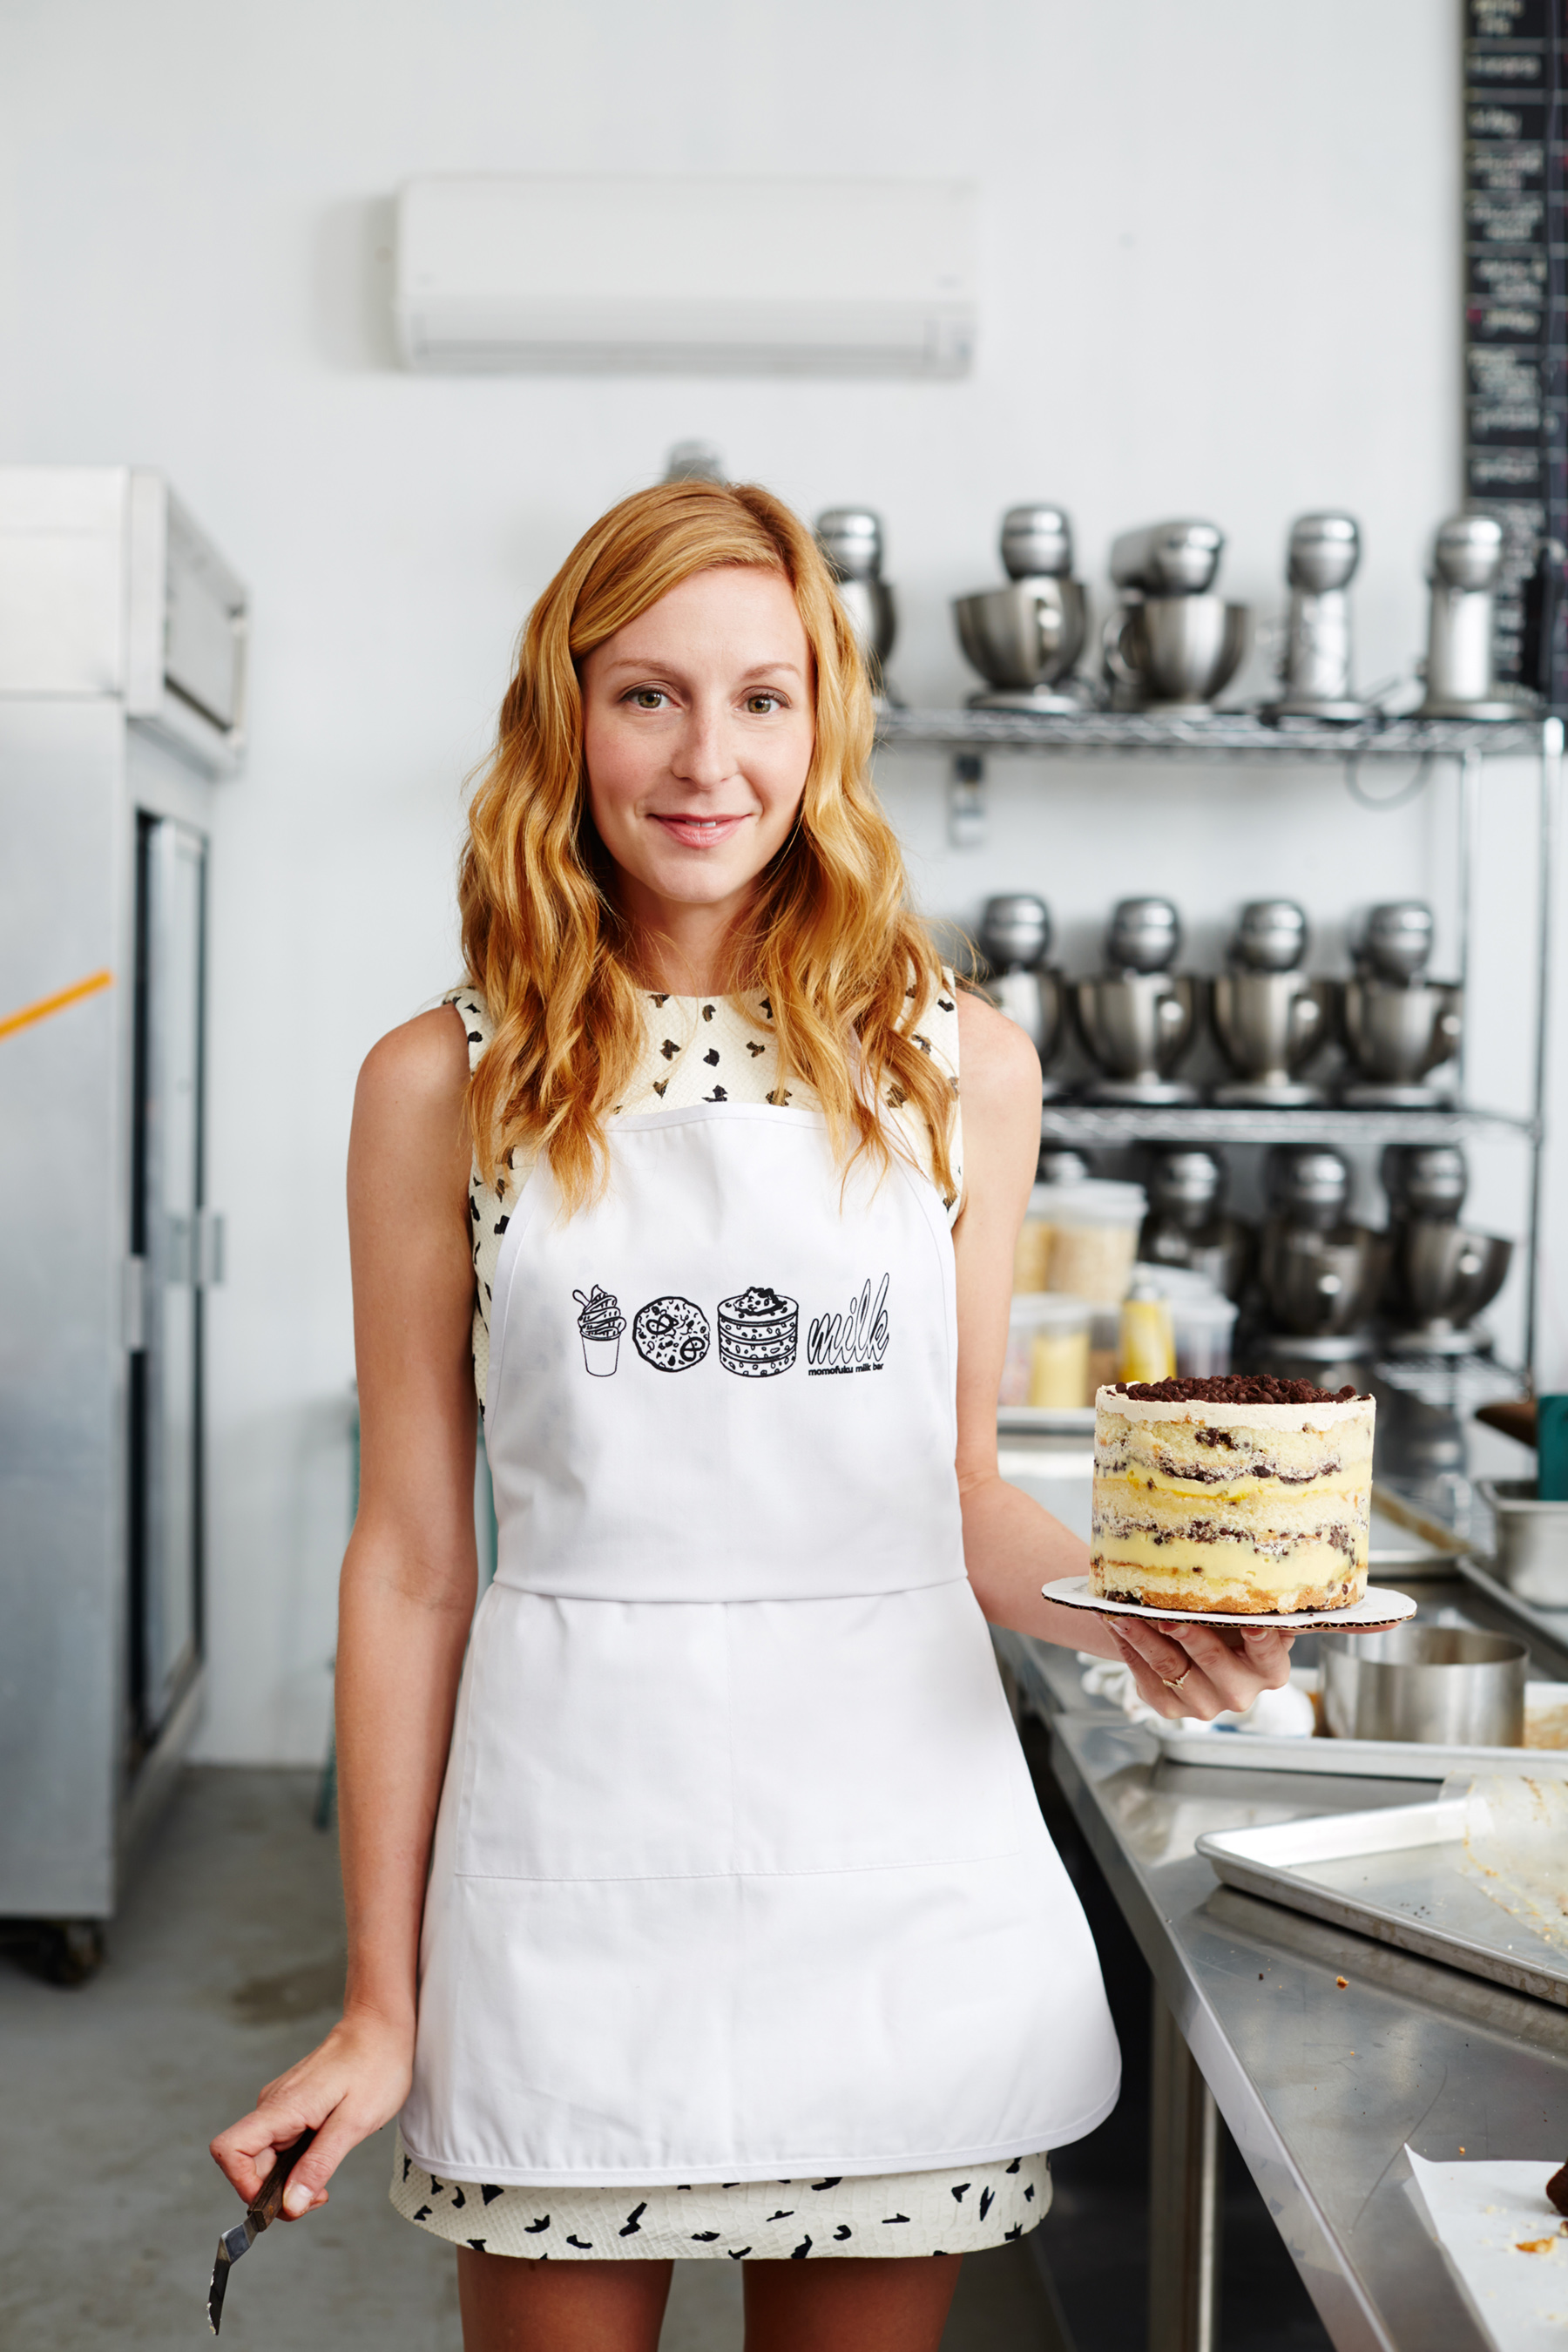 Christina Tosi will host a Champagne Brunch & Truffle-Making event duri...